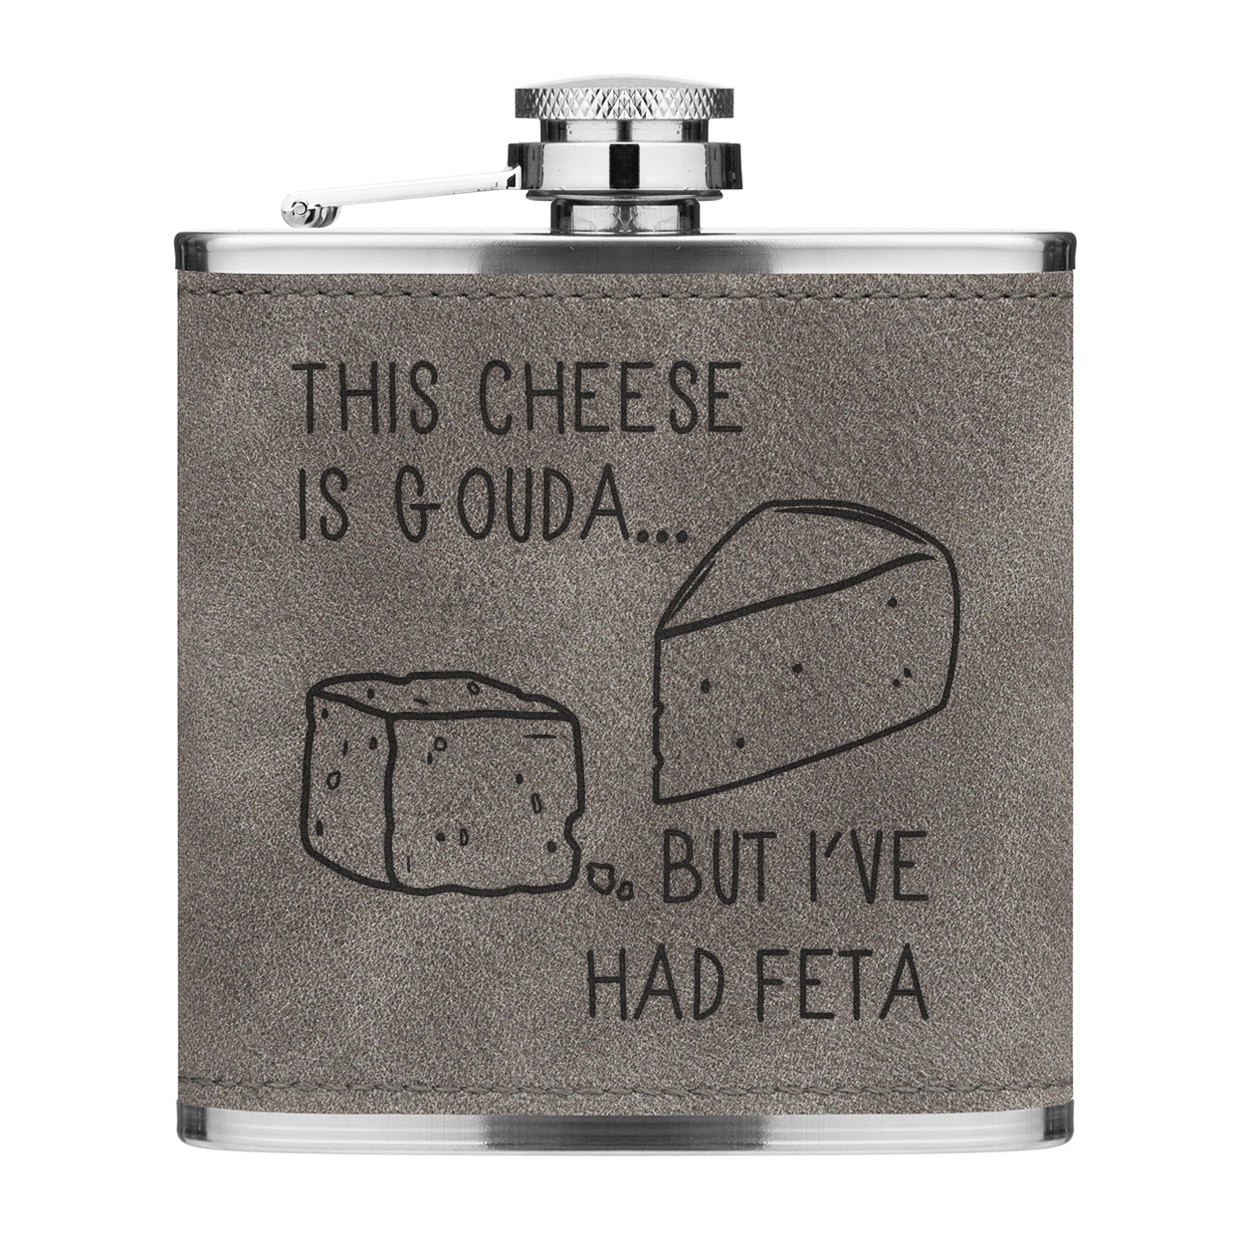 This Cheese Is Gouda But I've Had Feta 6oz PU Leather Hip Flask Grey Luxe